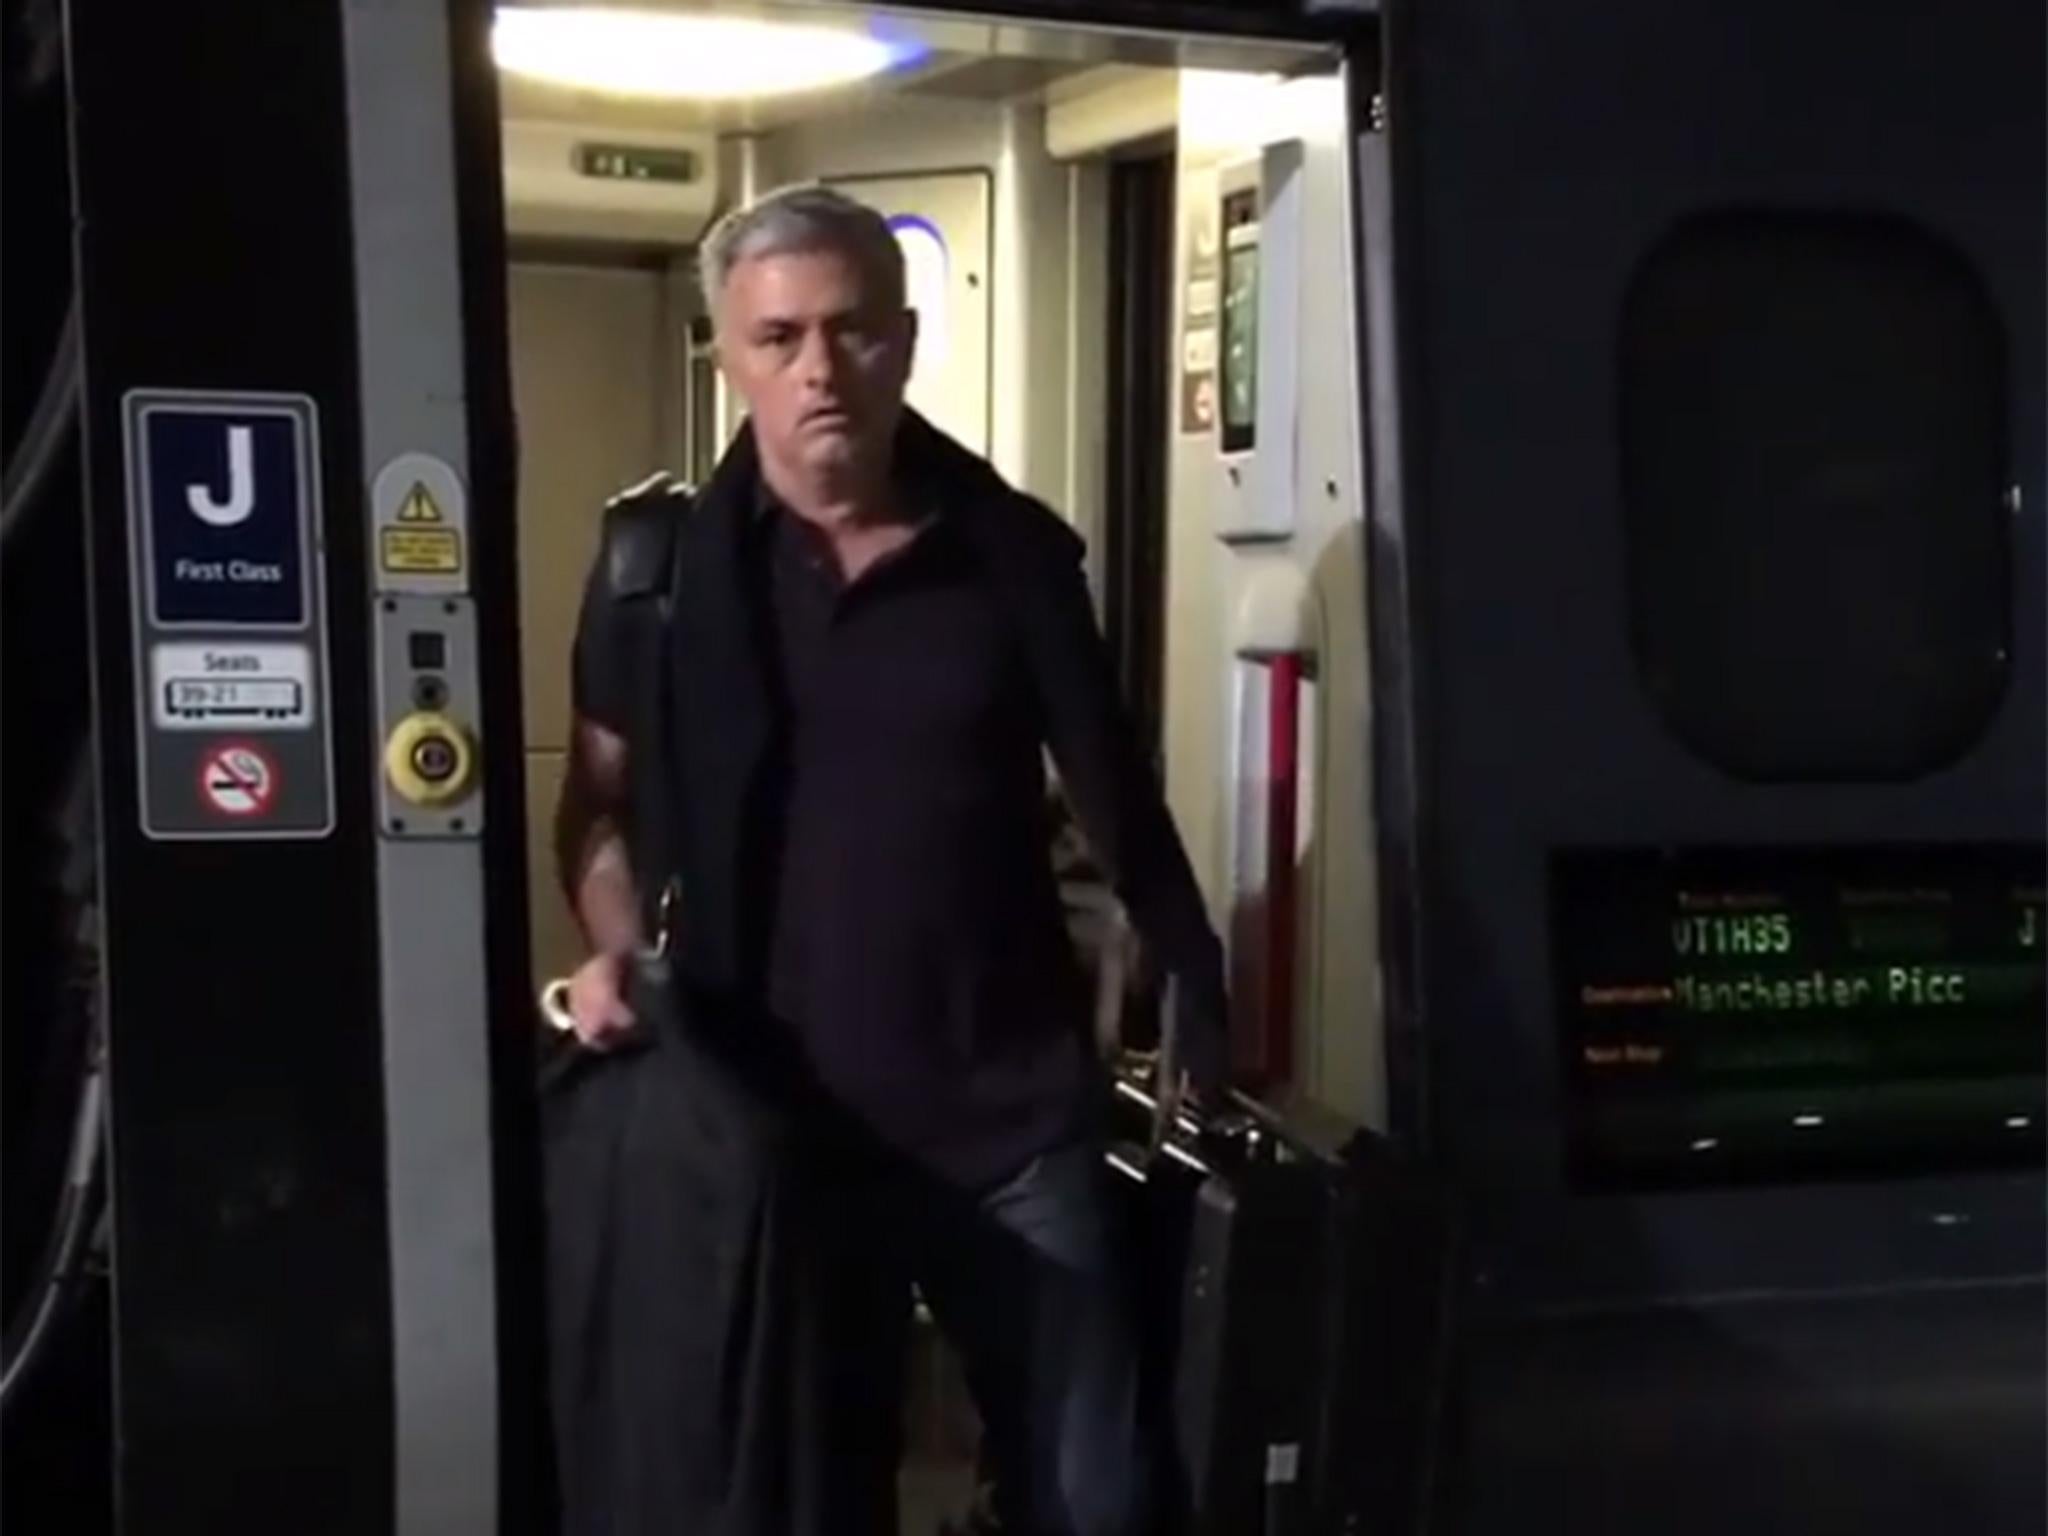 Mourinho disembarks from a train at Manchester Piccadilly station